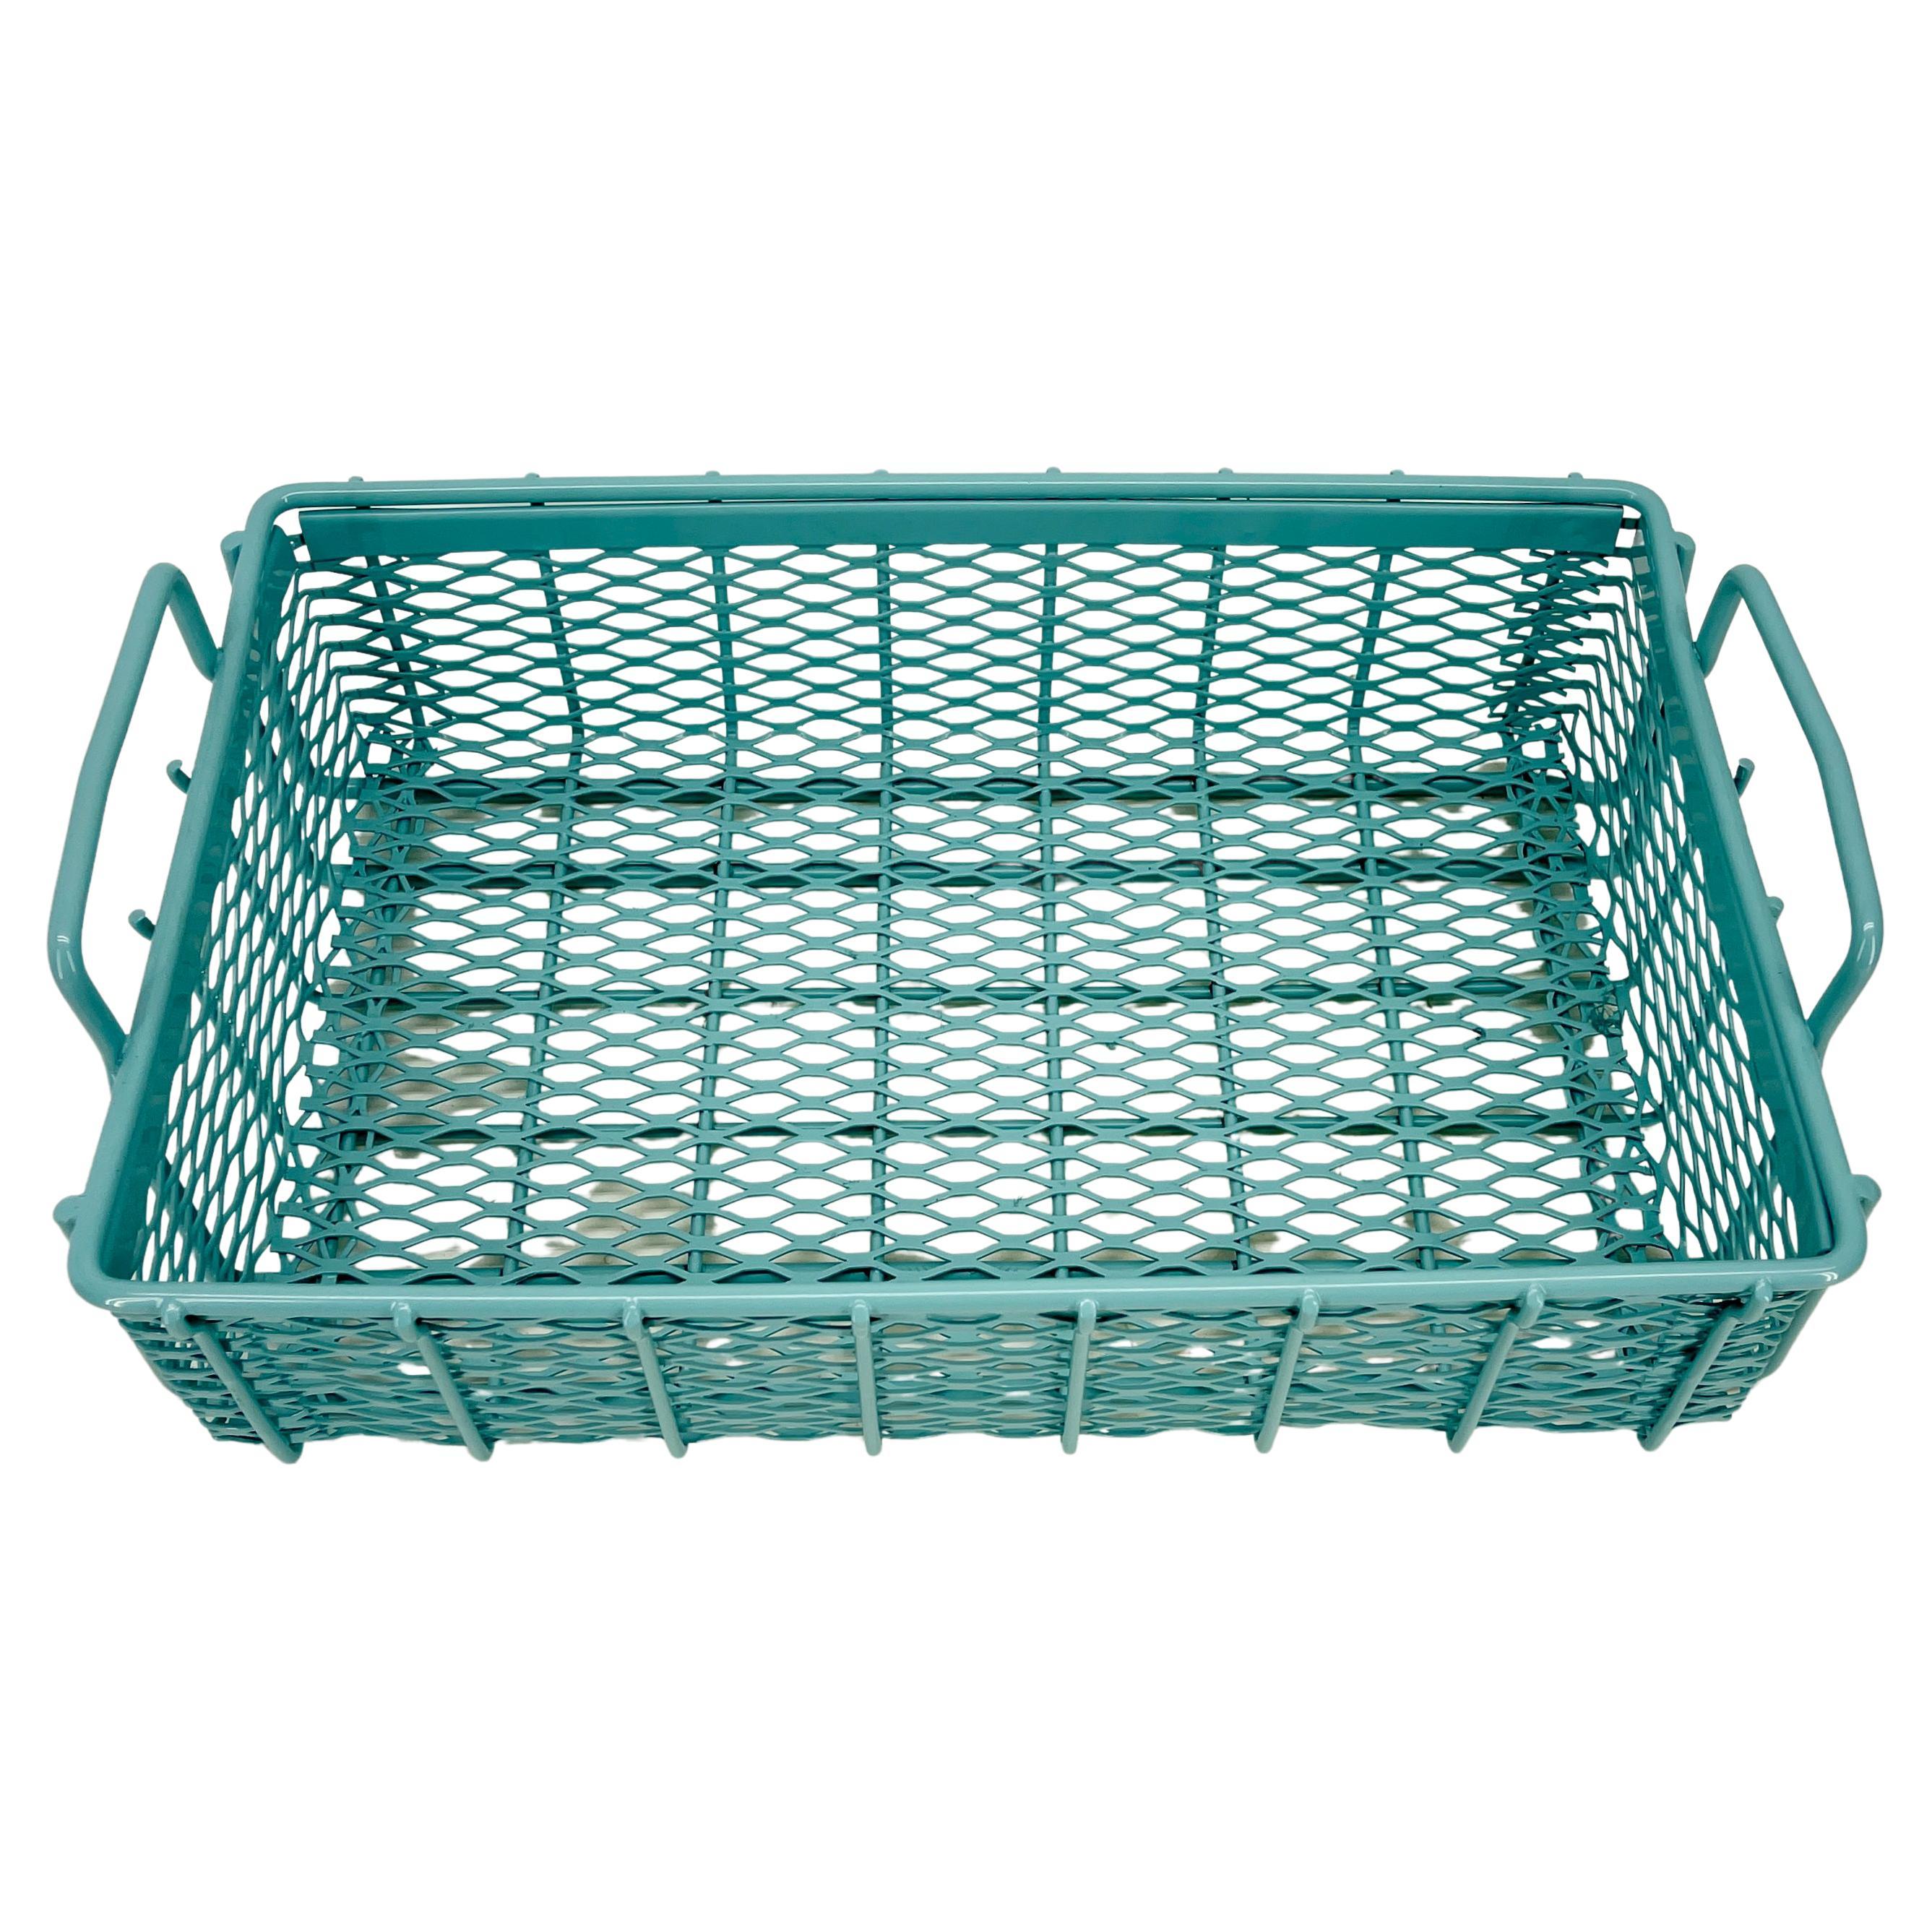 Industrial era metal stackable bins or baskets with handles. Freshly powder coated in vintage mellow turquoise. The bins have endless uses; in an office, mud room, hallway, or office. The beautiful, functional and hand-crafted bins are sturdy and